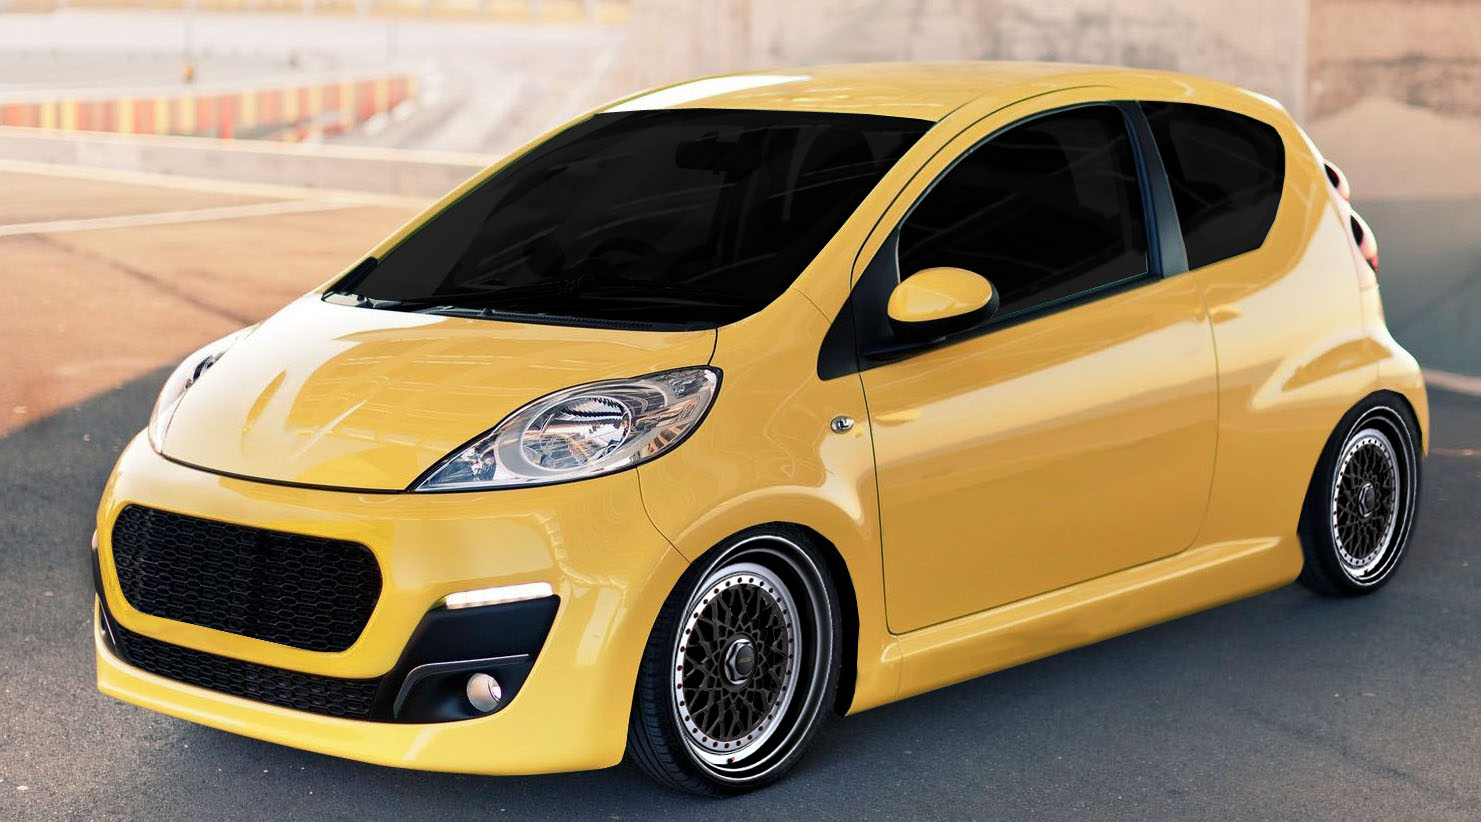 Peppe_ Pica_YT - Peugeot 107 stance and before and after